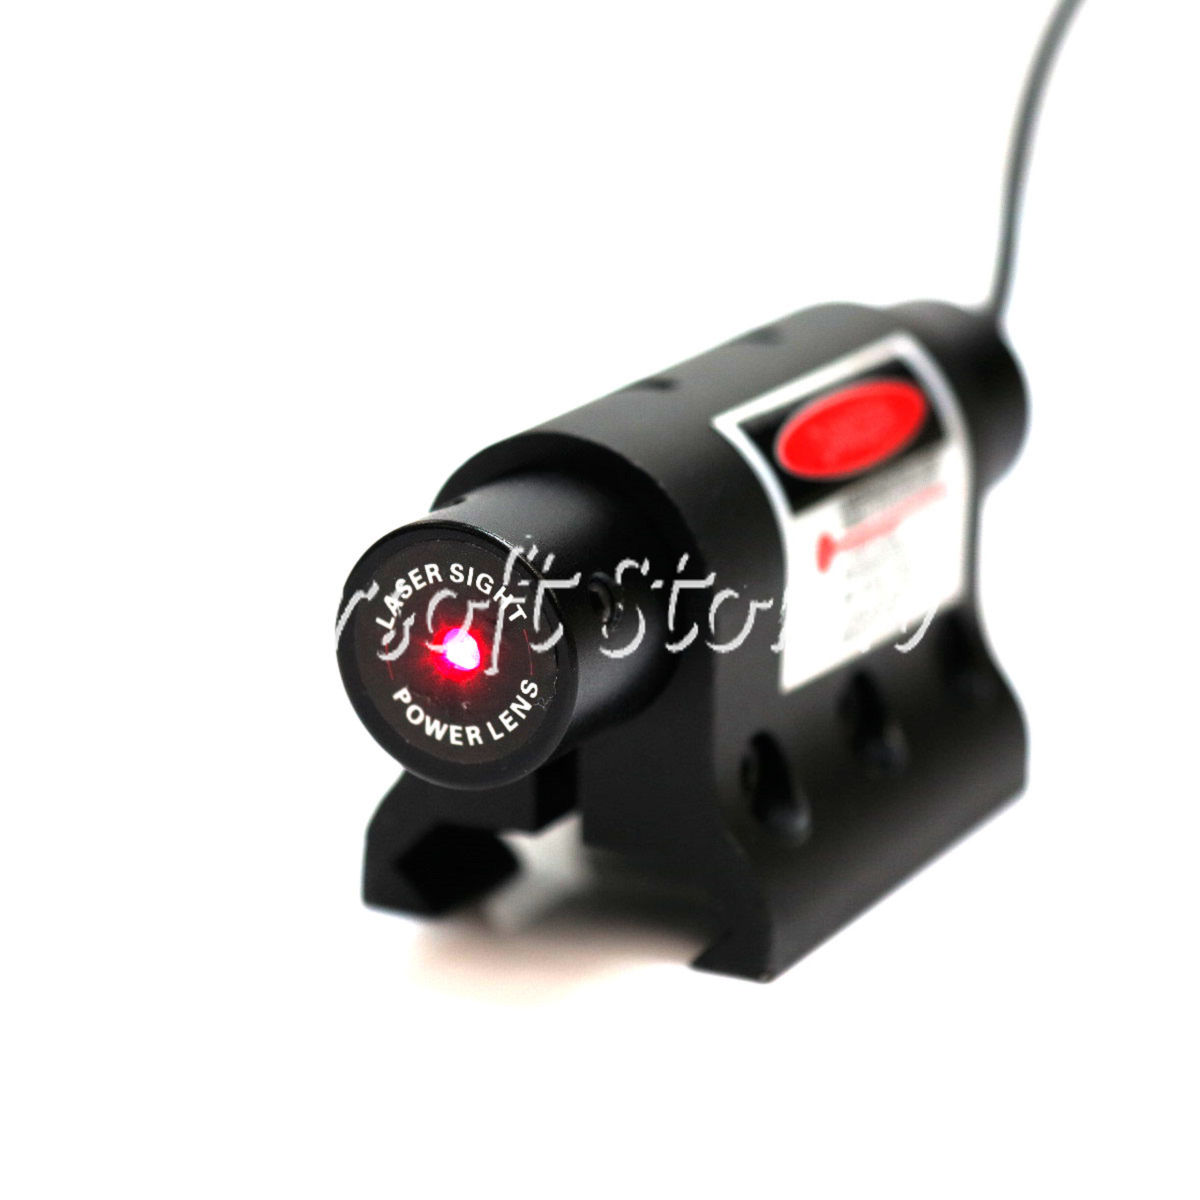 LXGD Tactical Gear Compact Red Laser Tactical Sight Pointer JG-11